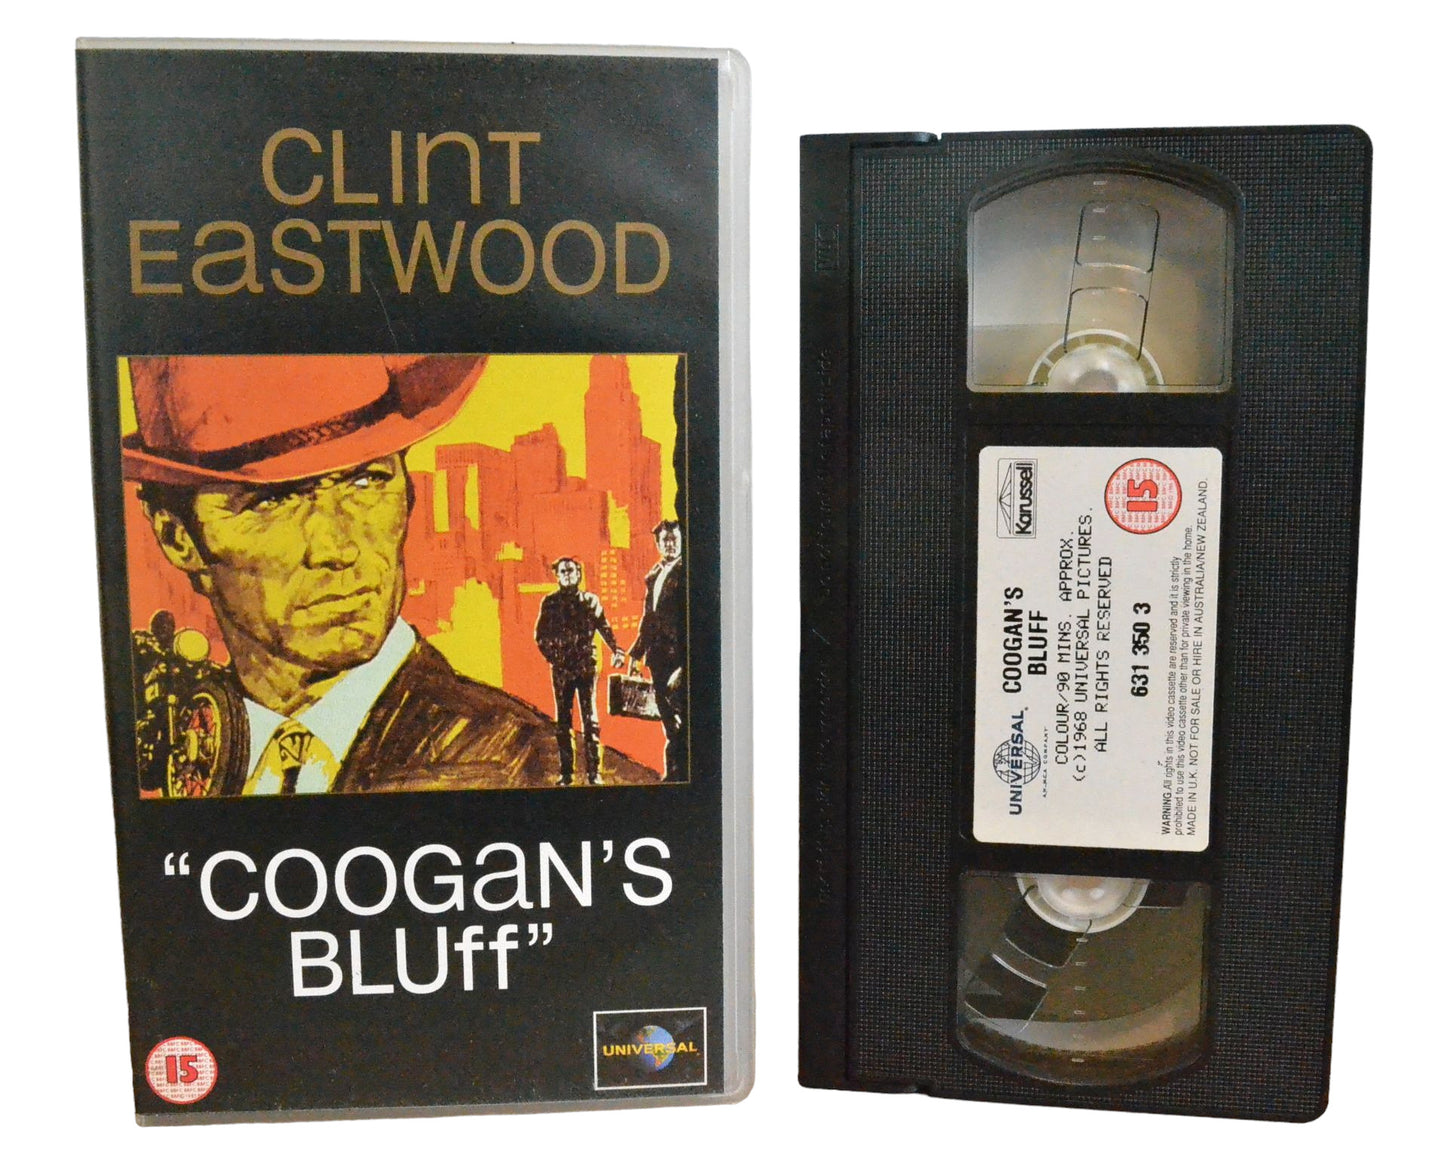 Coogan's Bluff - Clint Eastwood - Universal Video - 6313503 - Action - Pal - VHS-